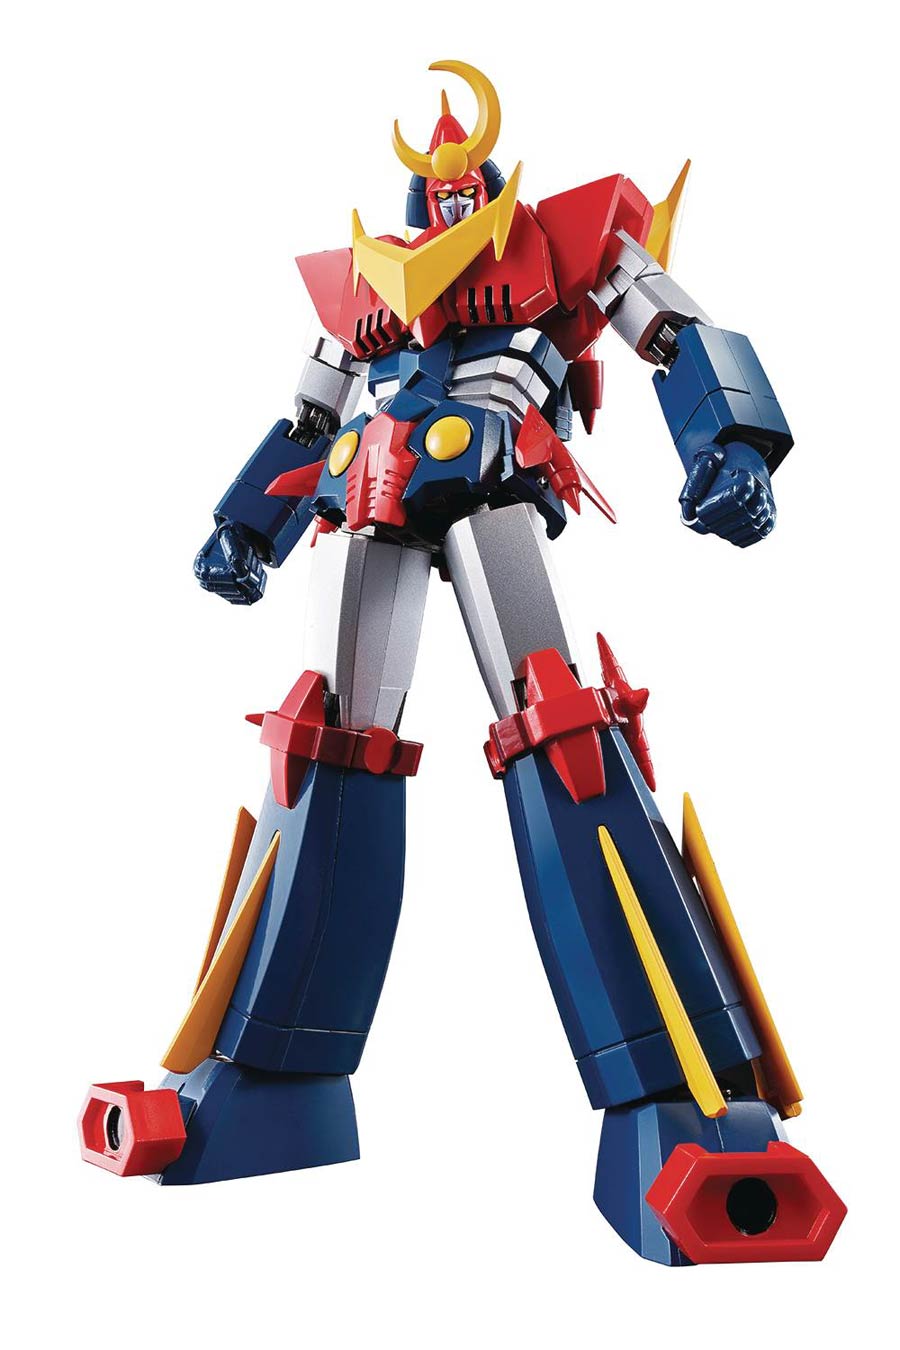 Soul Of Chogokin GX-84 Invincible Super Man Zambot 3 Full Action Die-Cast Action Figure